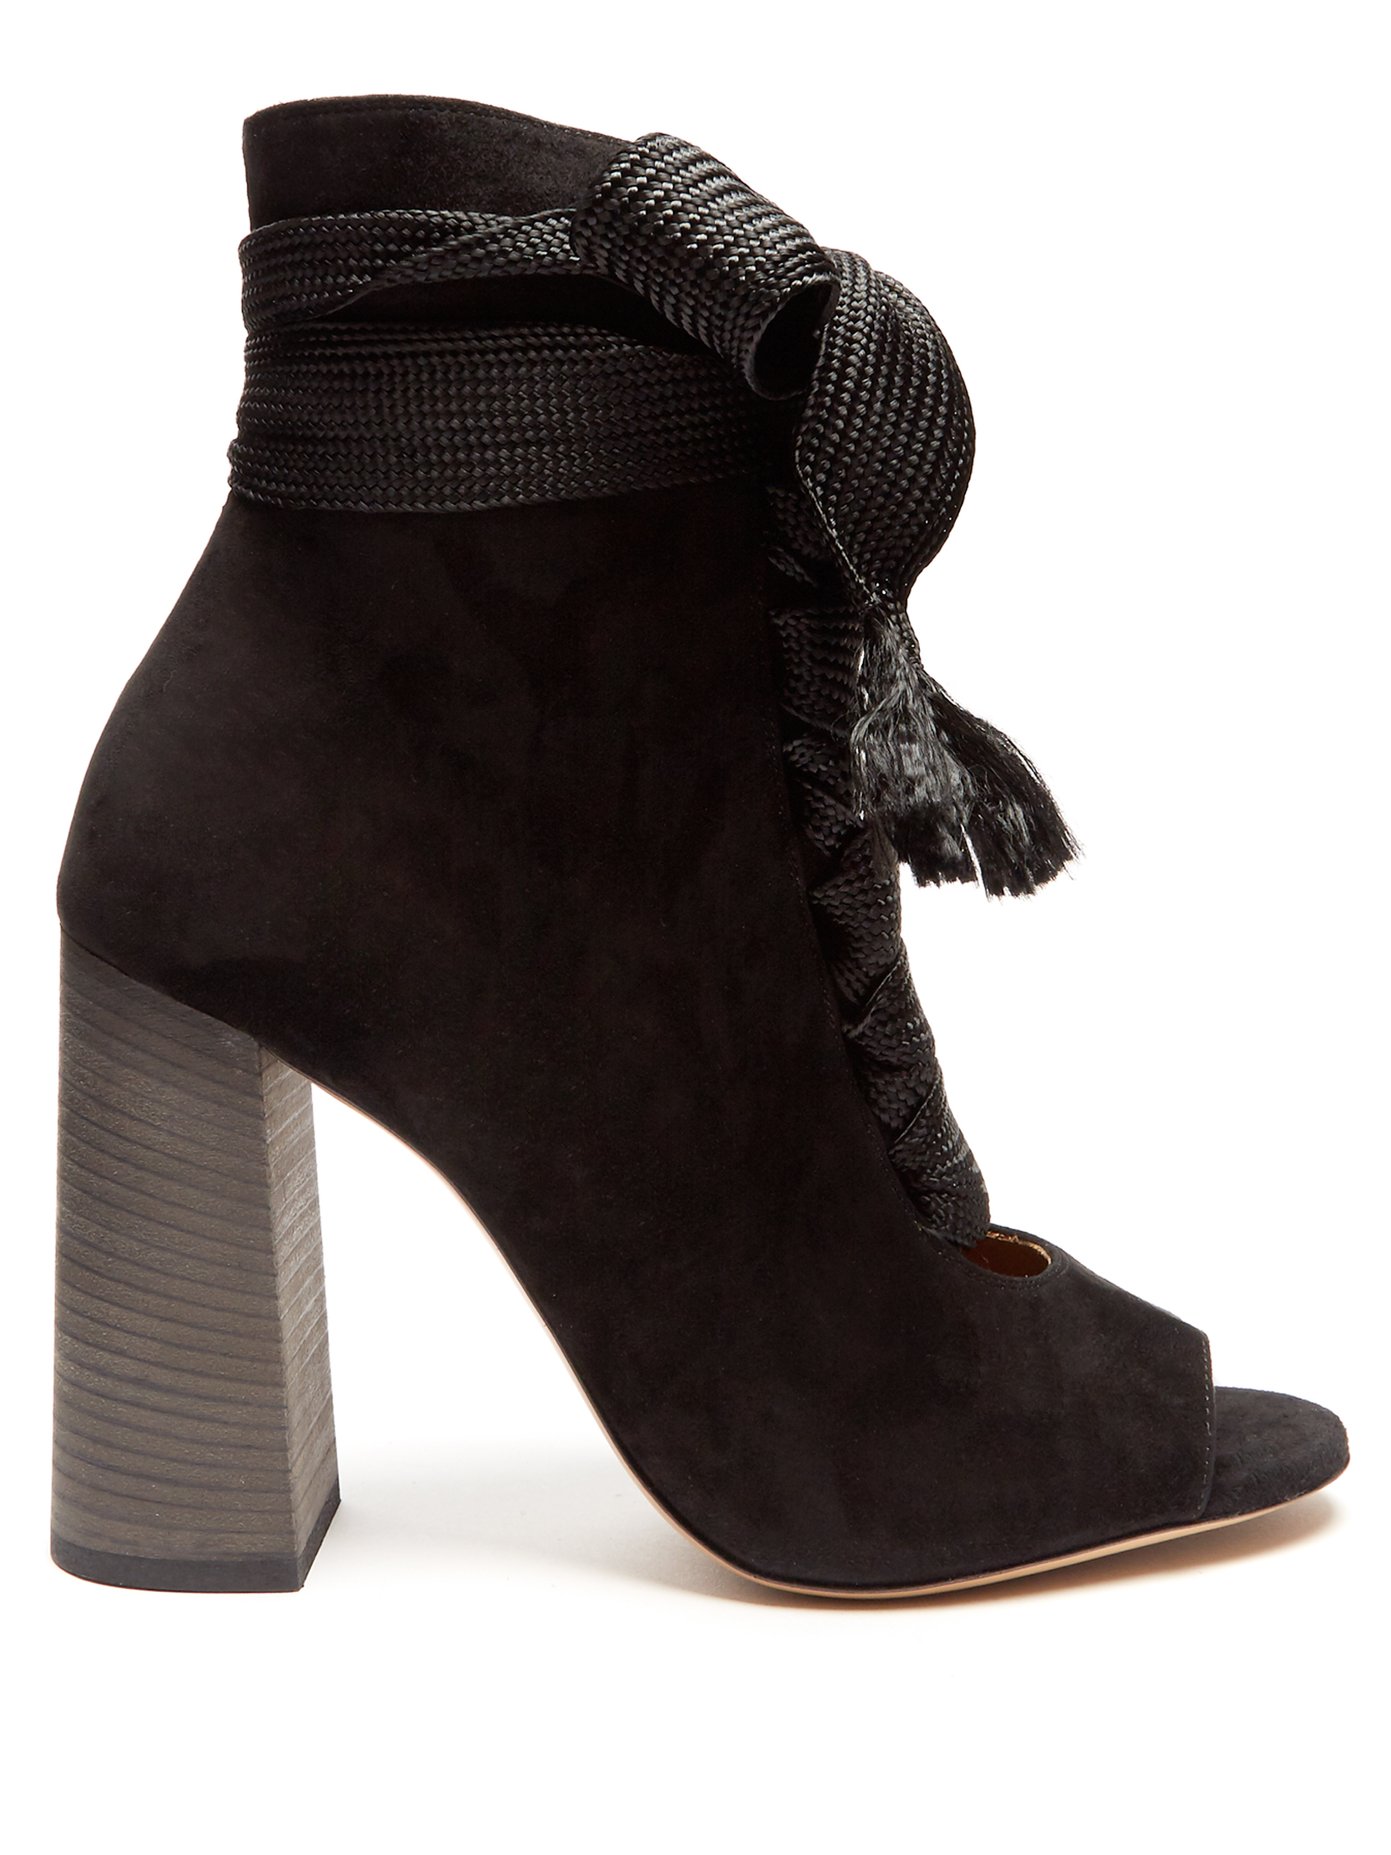 chloe harper lace up boots